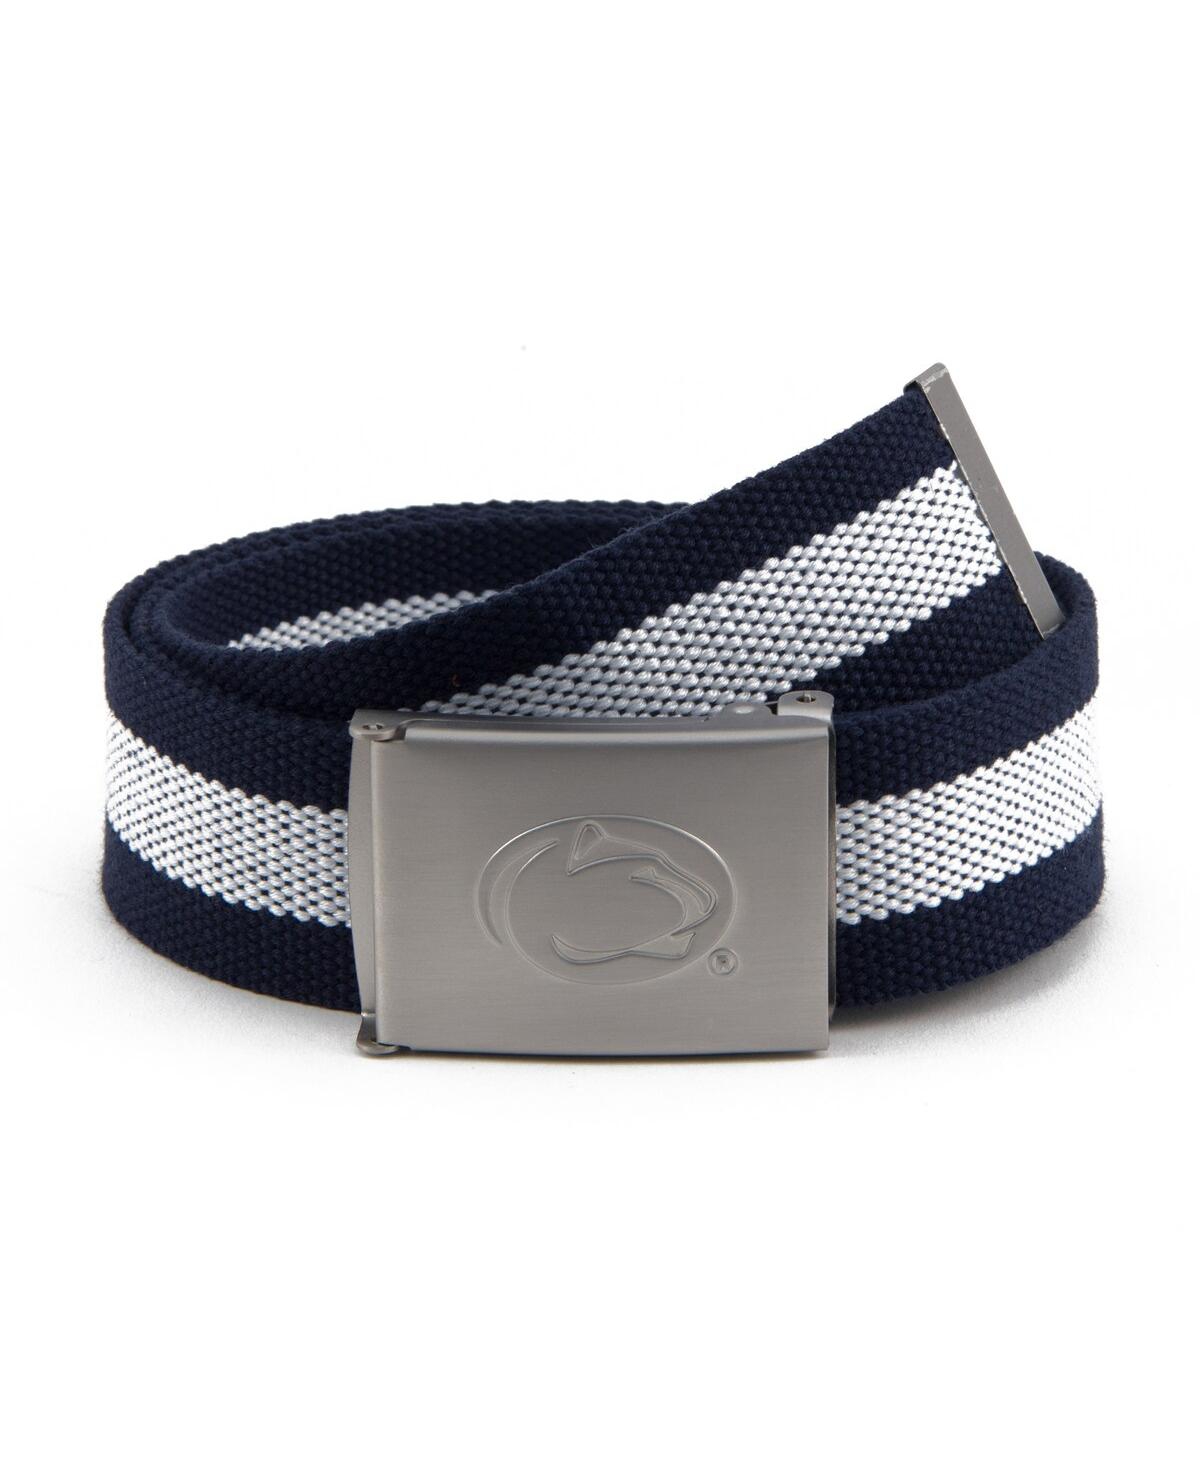 Eagles Wings Men's Penn State Nittany Lions Fabric Belt In Blue